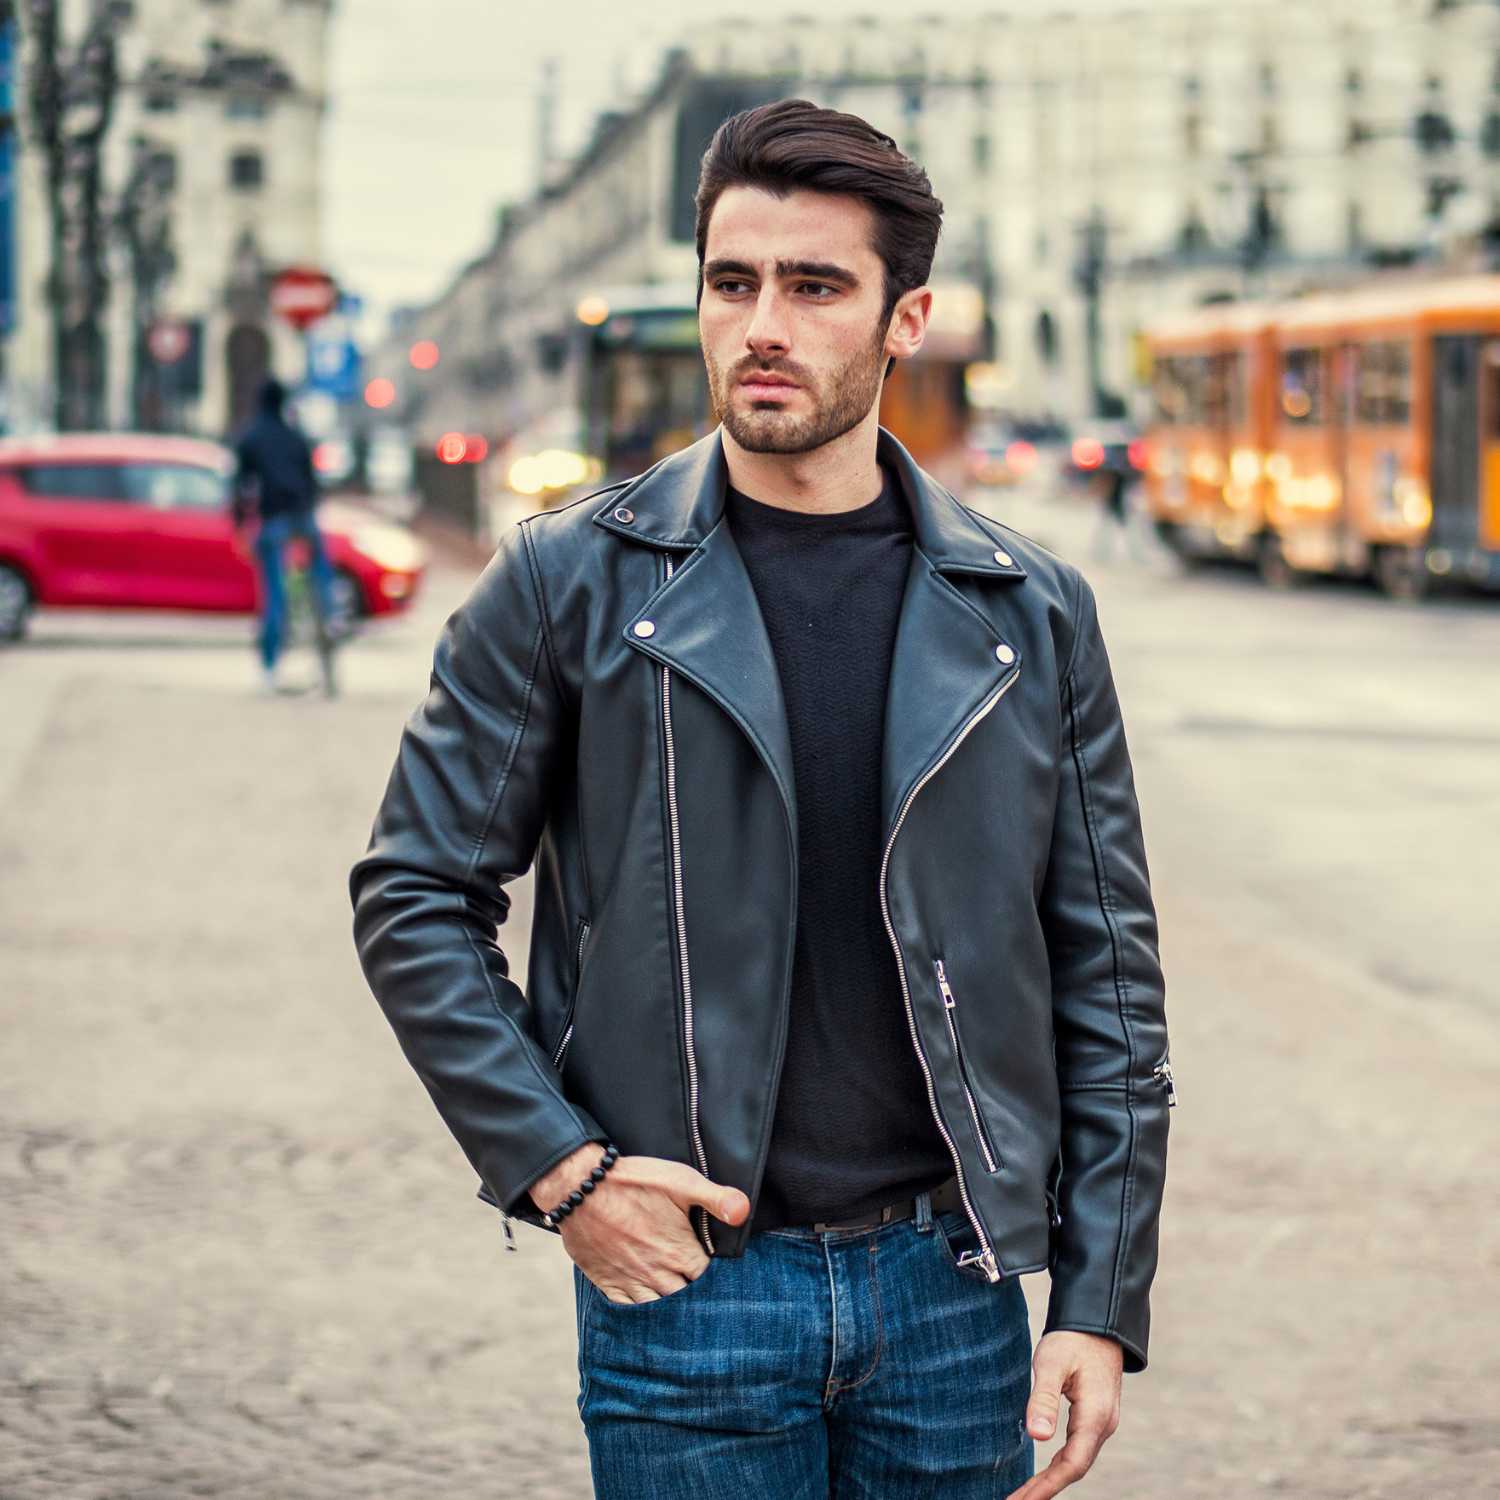 Leather jacket outfit men, Black leather